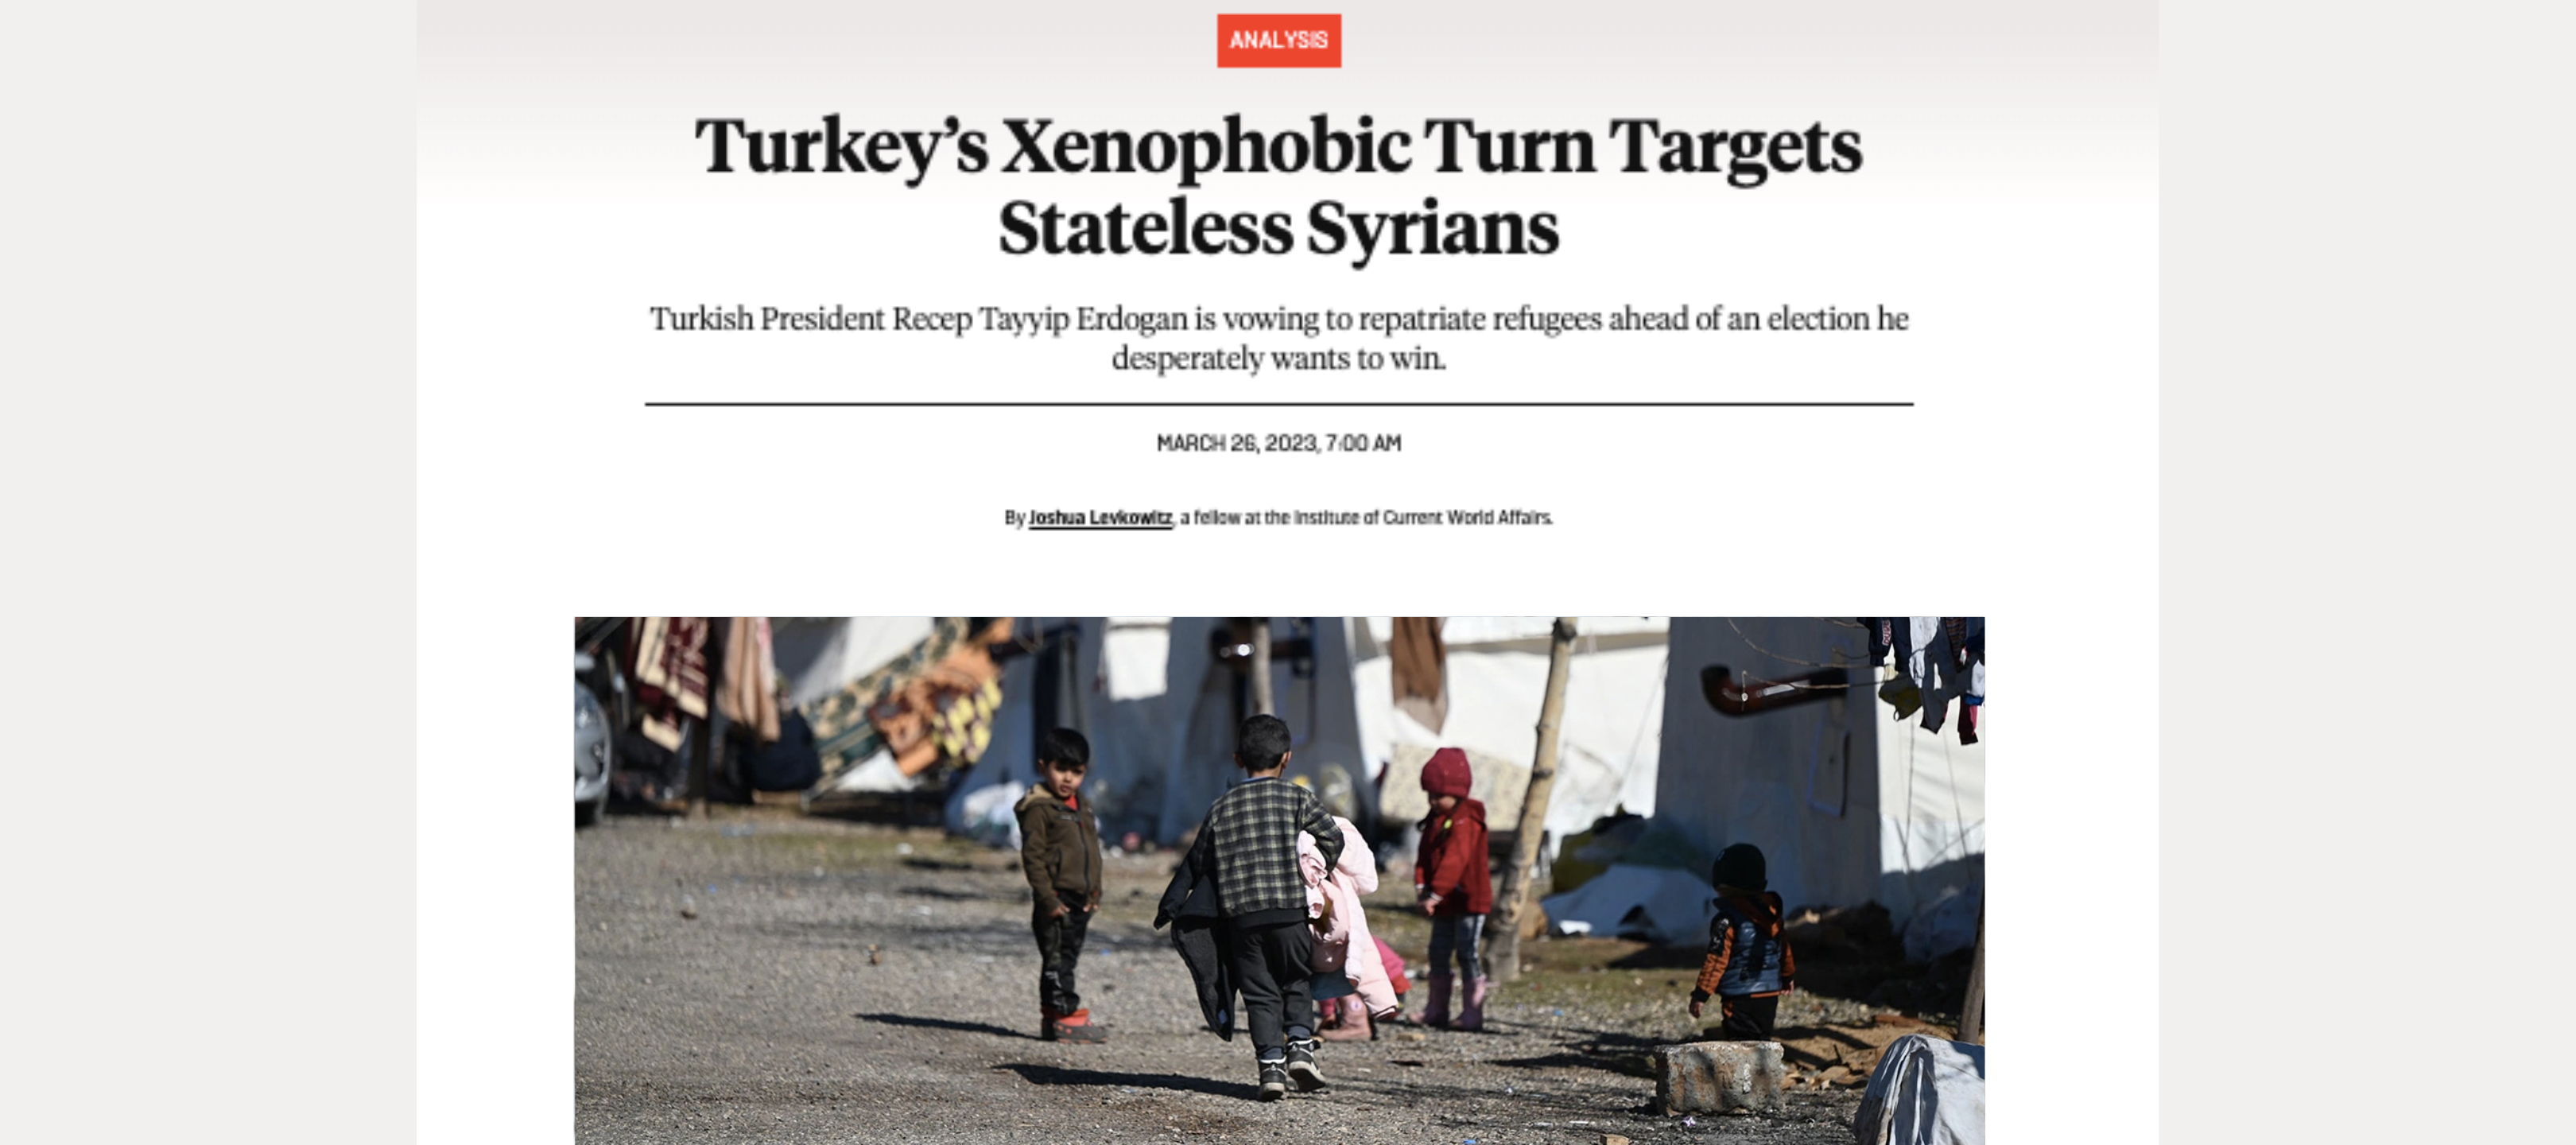 New article about xenophobia & discrimination of stateless Syrians in Turkey